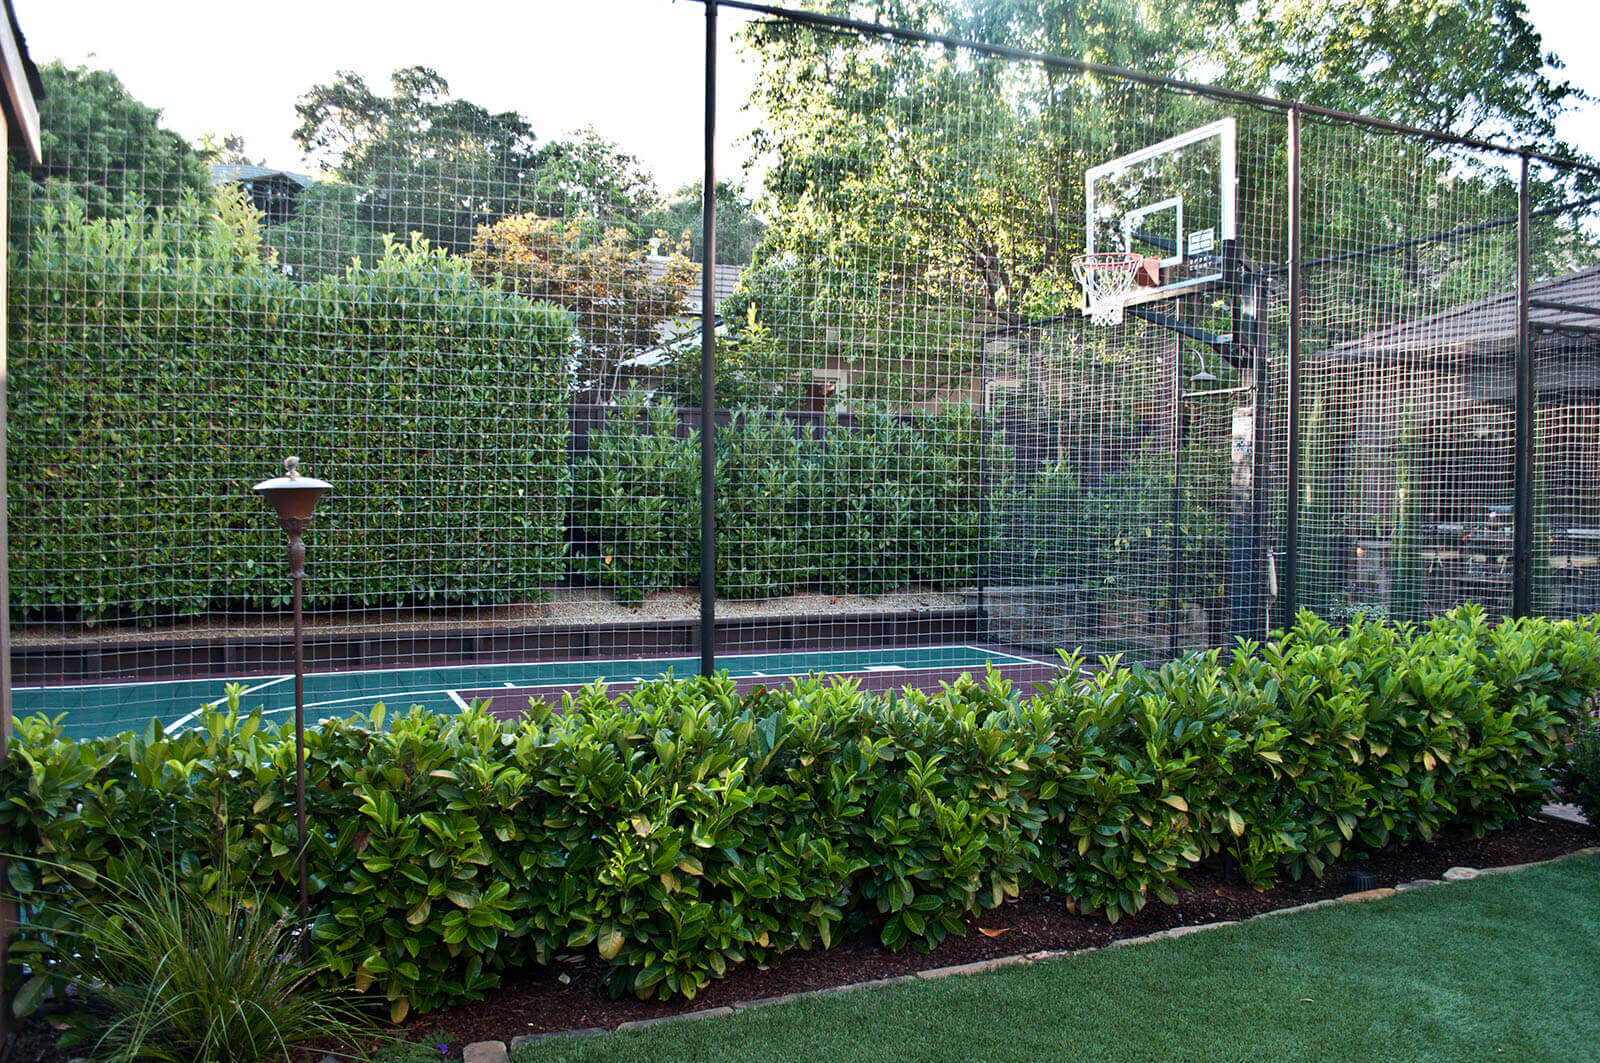 Fenced private basketball court with green border bushes next to manicured lawn